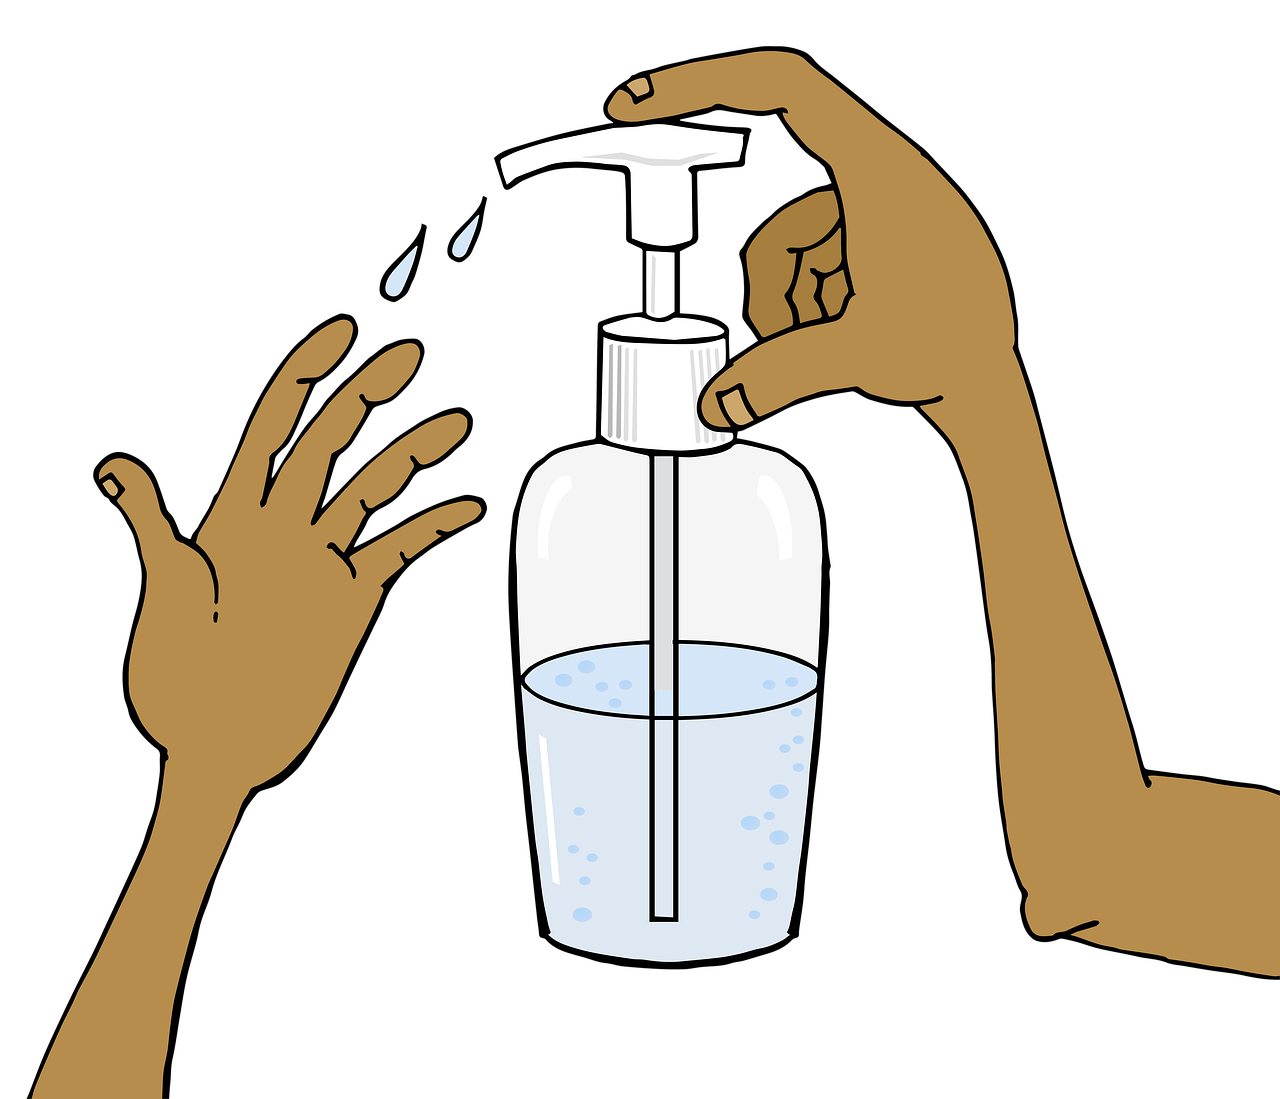 Handwashing - Cultural Perspectives on Personal Hygiene Practices Around the World